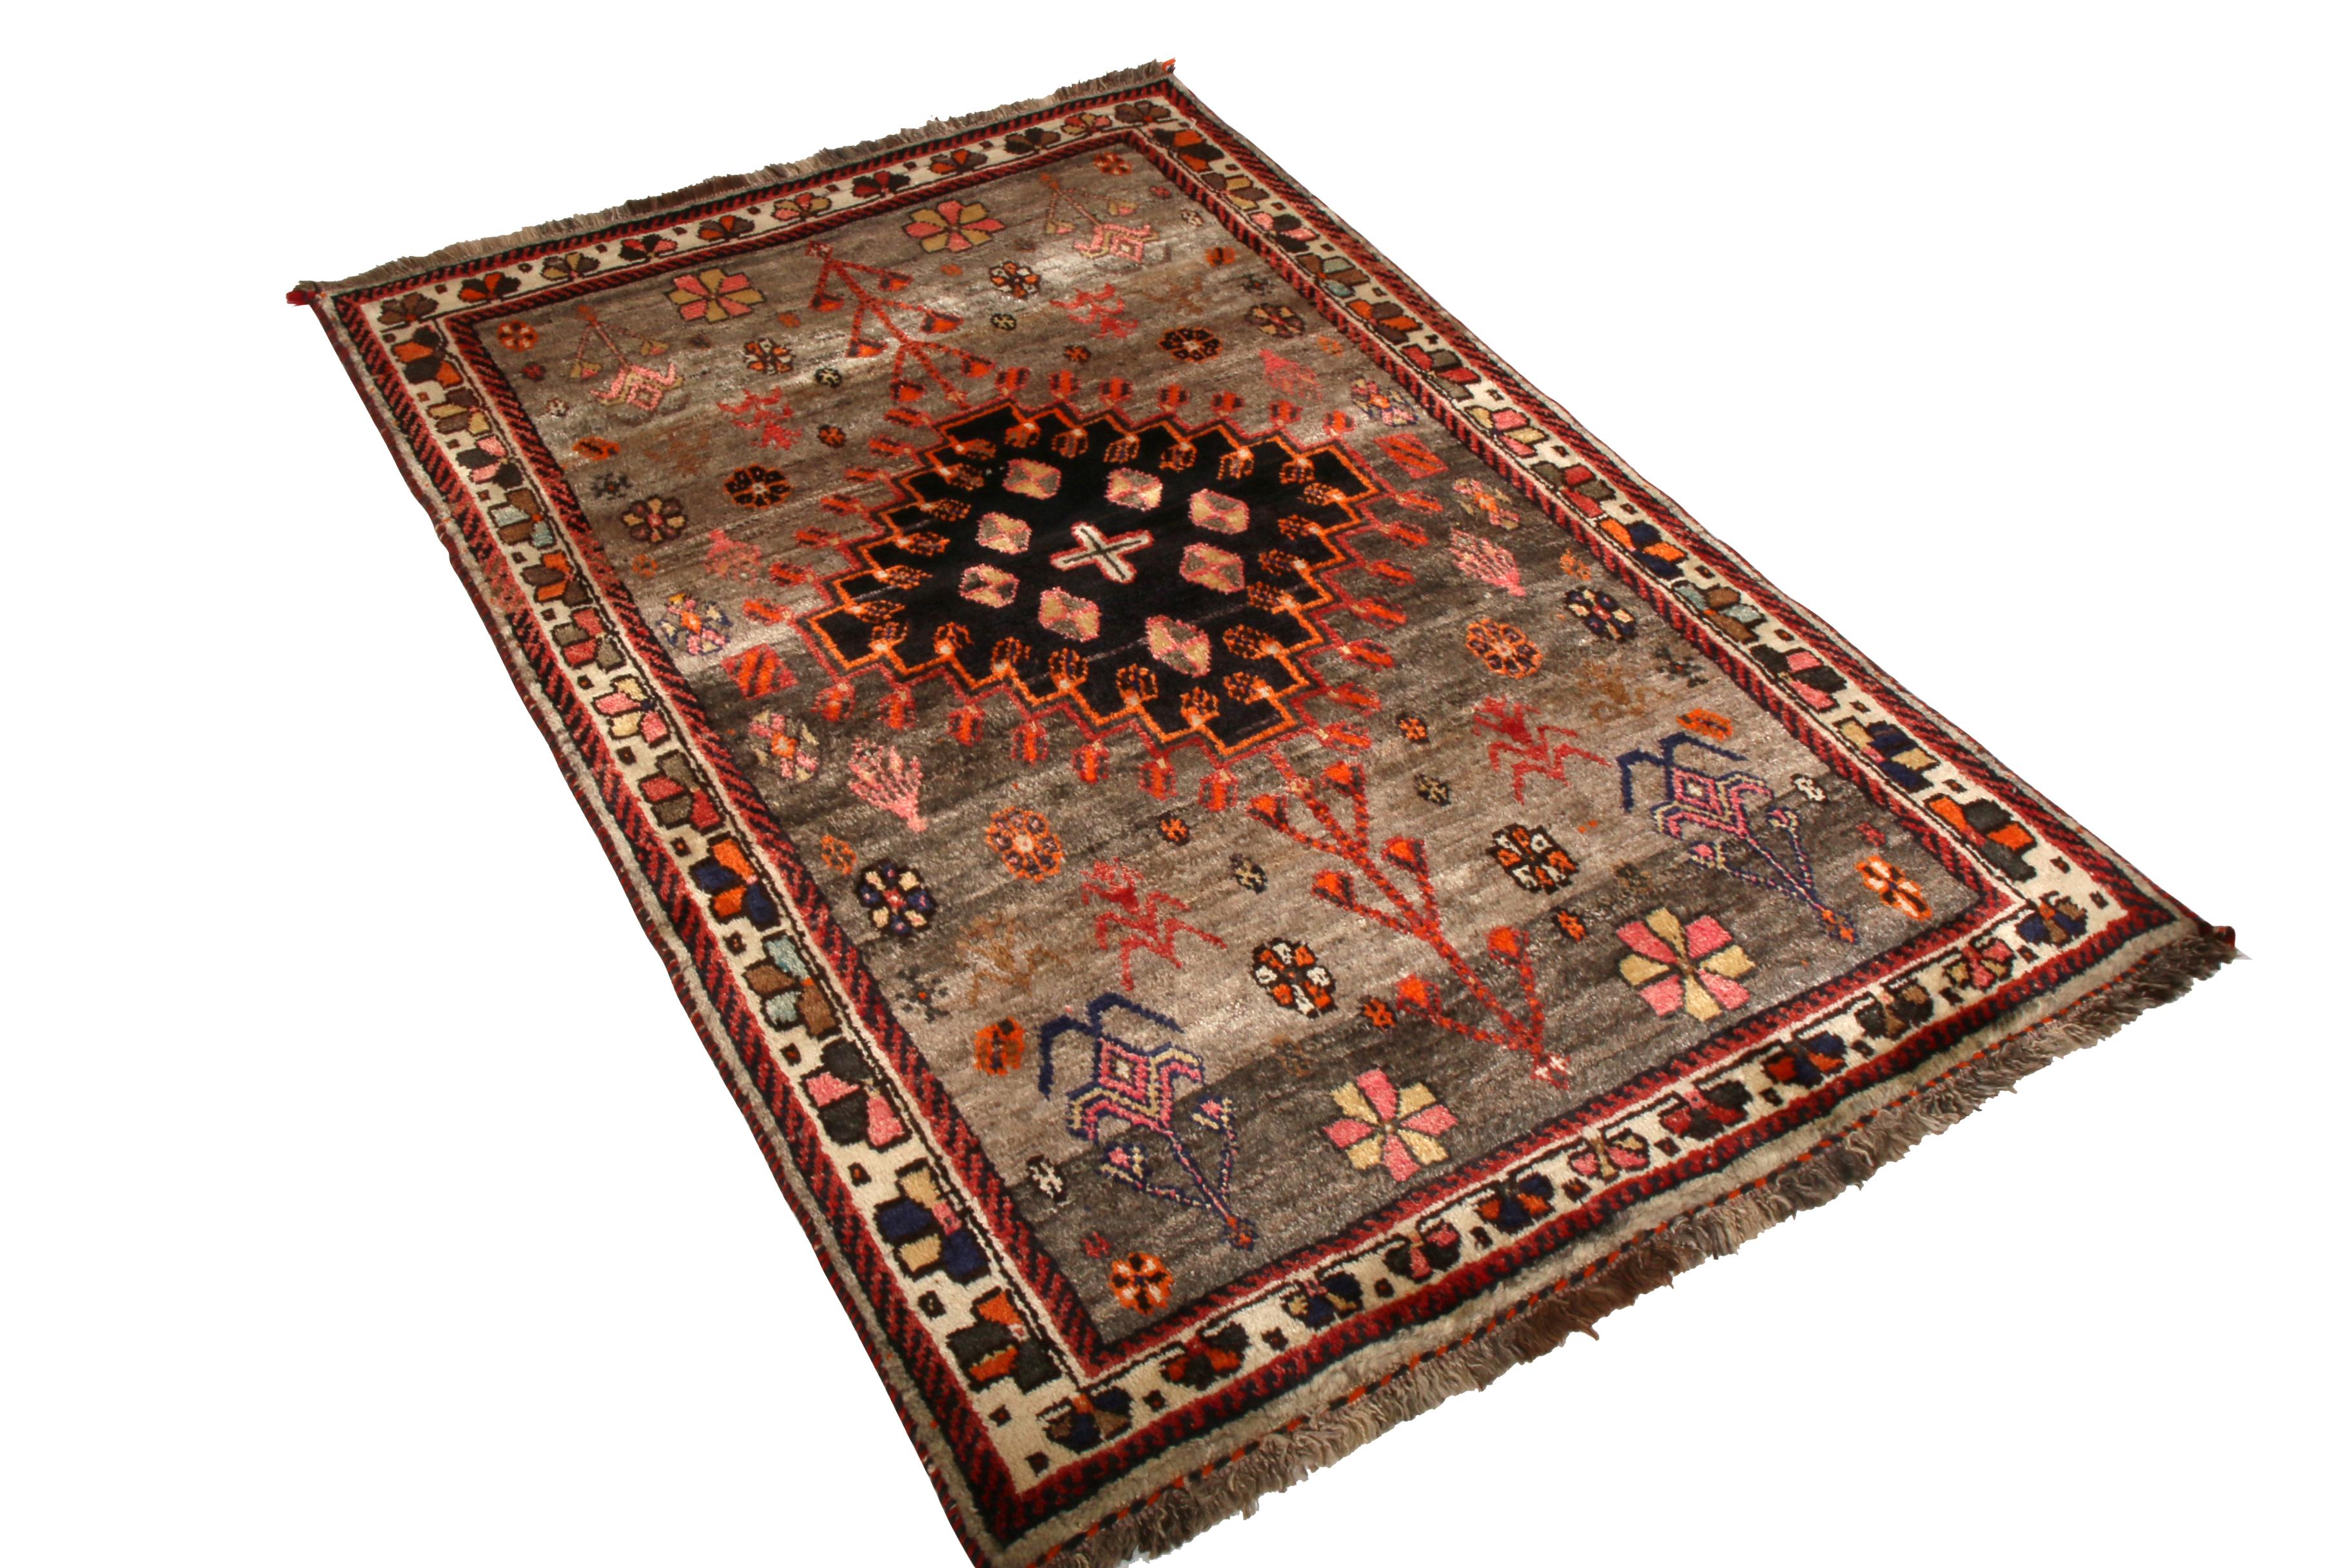 Hand knotted in wool originating between 1950-1960, this vintage midcentury Persian rug enjoys one of the most distinct colorways among this Classic lineage, identified as a vintage Gabbeh rug departing from the more common geometric preferences of